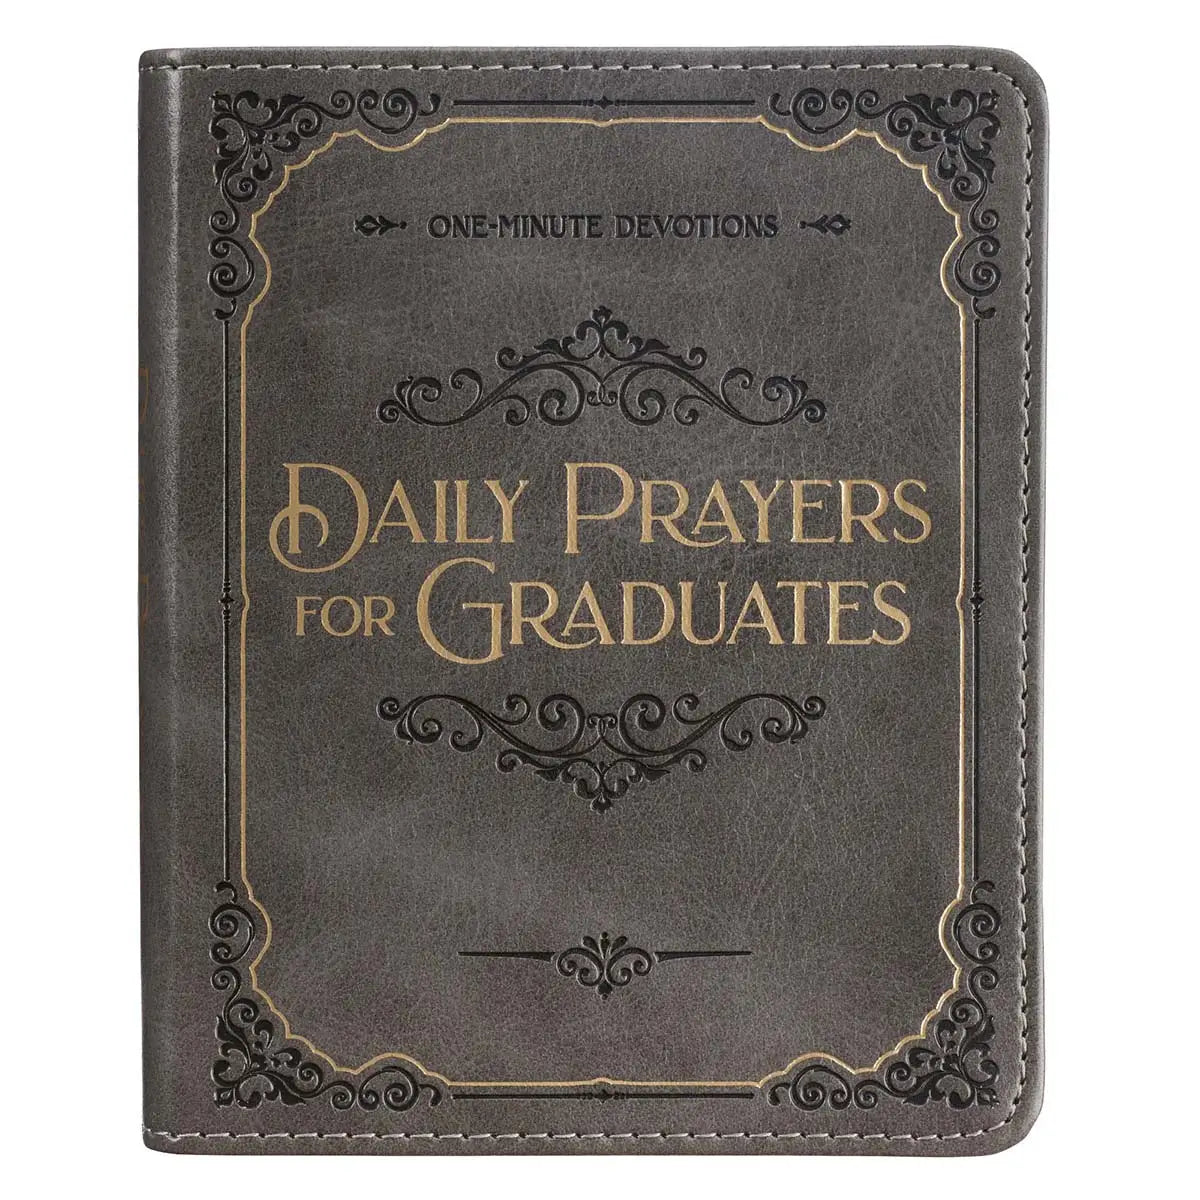 Daily Prayers for Graduates Leather Devotional